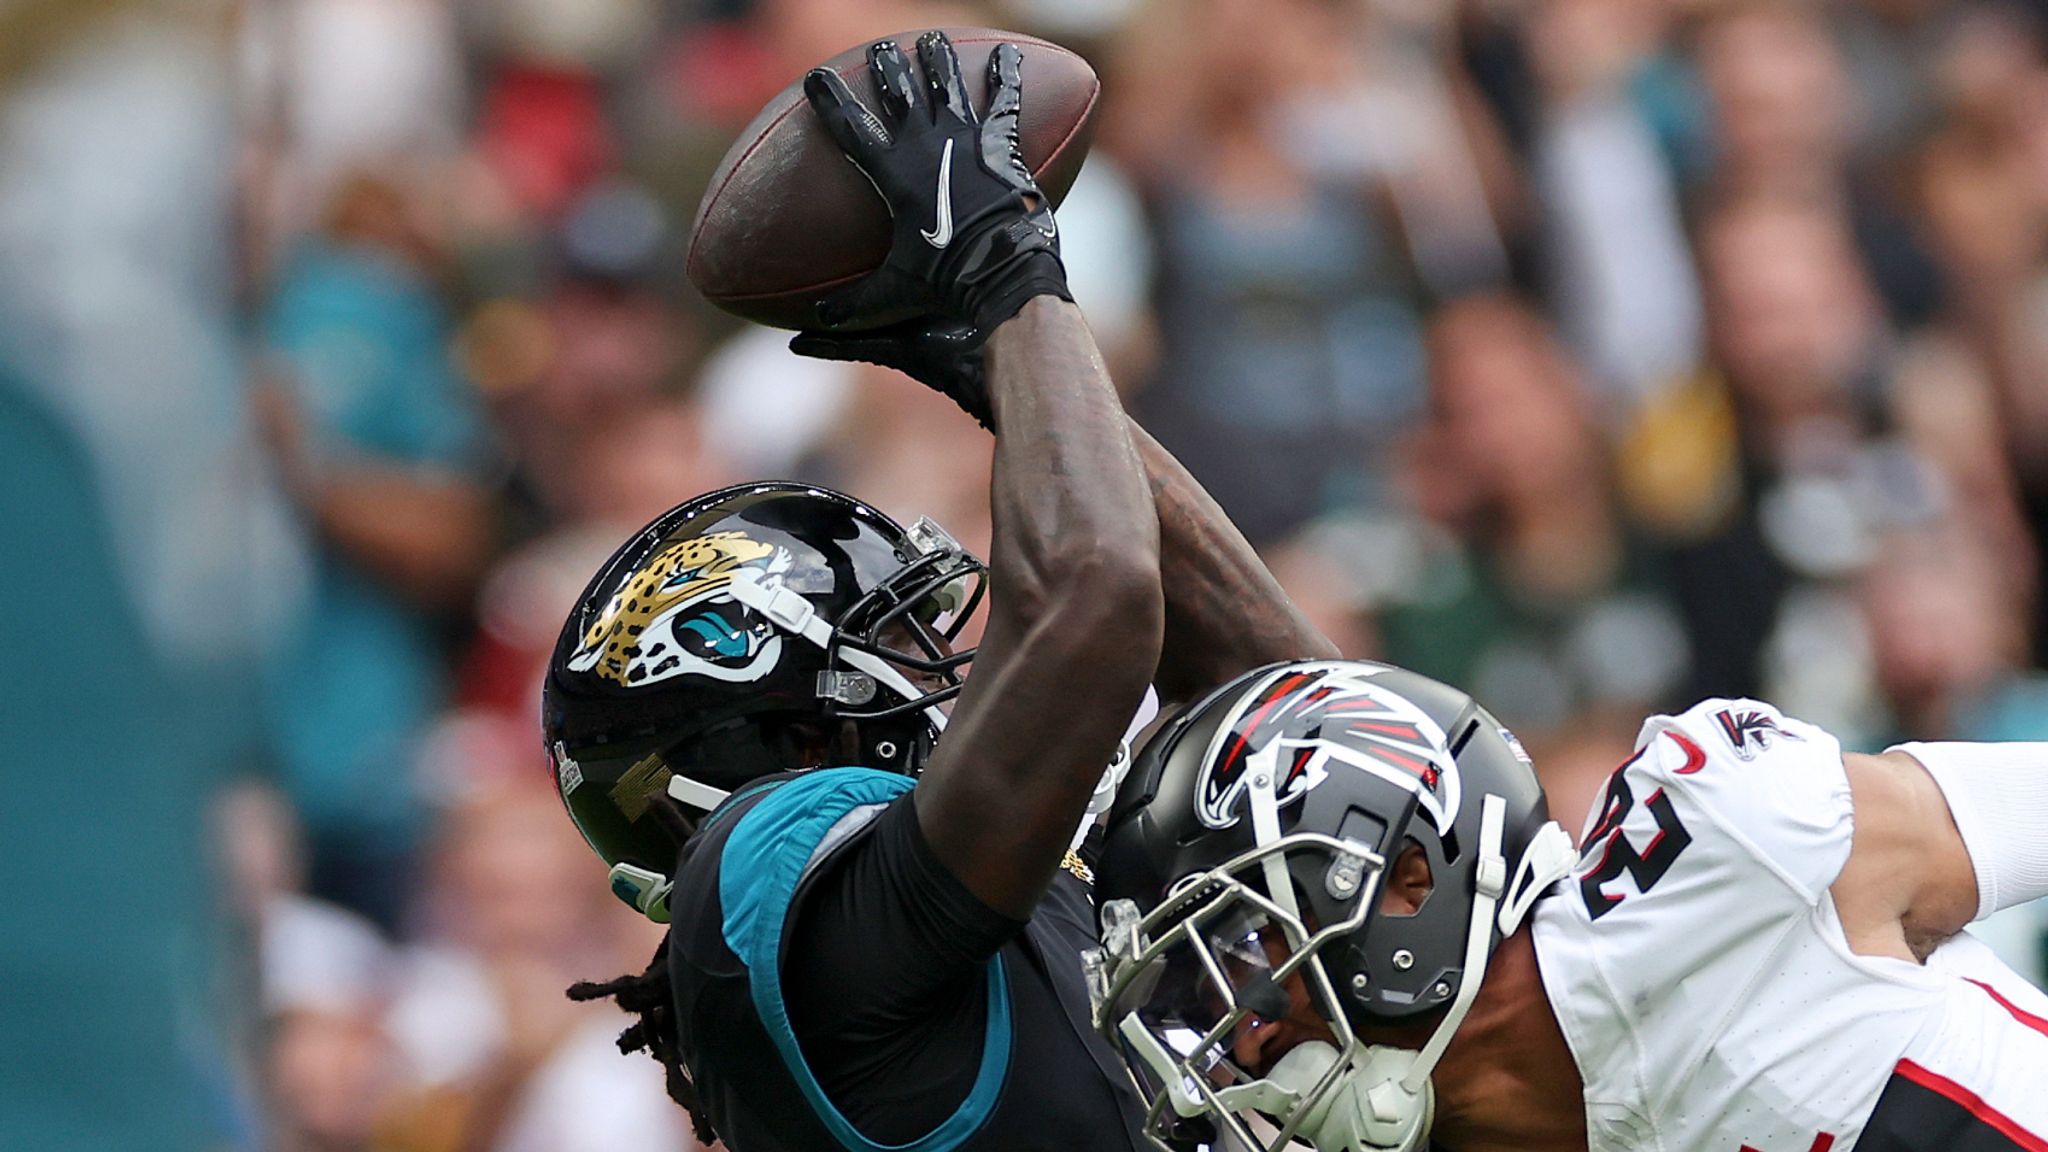 Lawrence, Ridley and defense help Jaguars beat Falcons 23-7 in